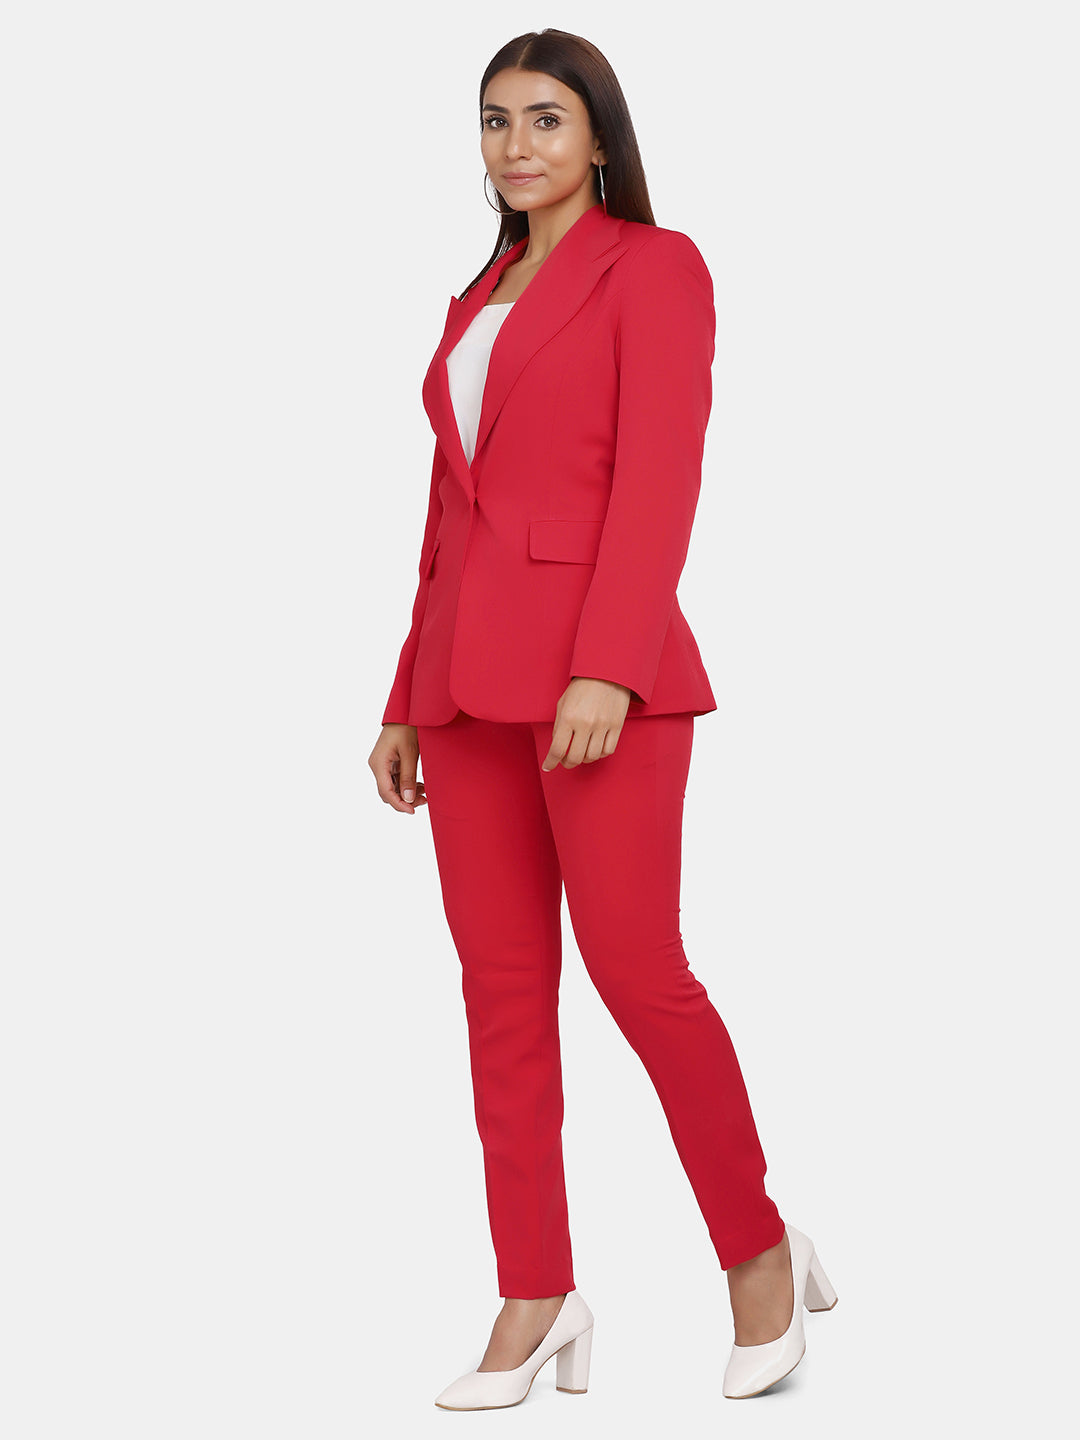 Red Formal Pant Suit For Work